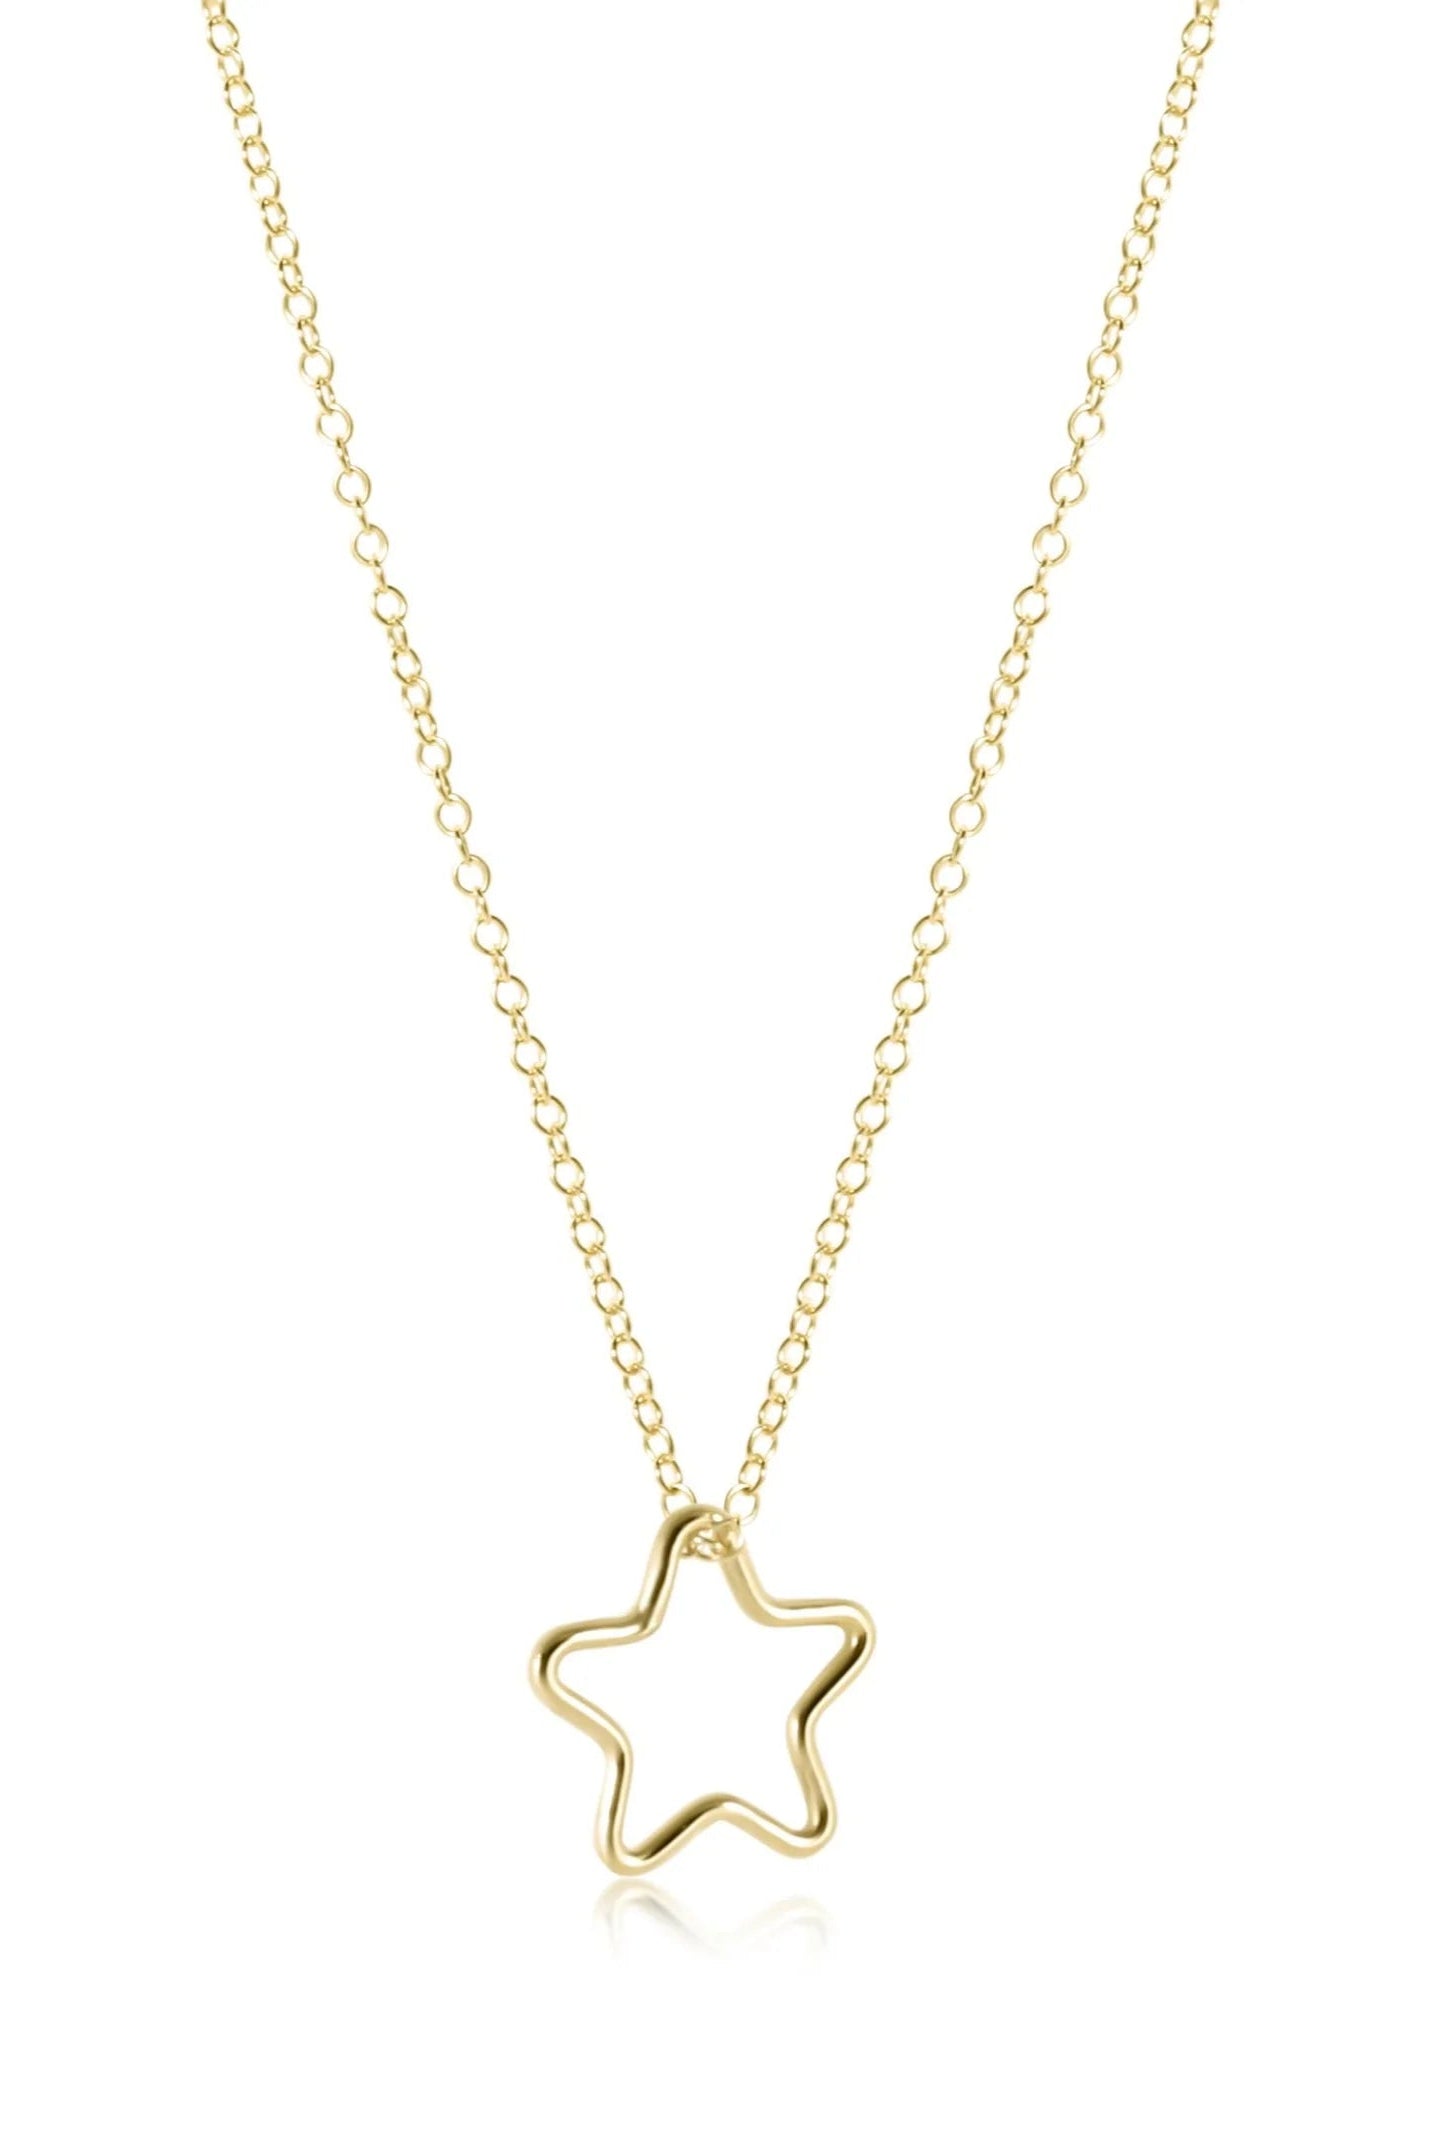 16’ Star Gold Charm Necklace-Necklaces-eNewton-The Lovely Closet, Women's Fashion Boutique in Alexandria, KY